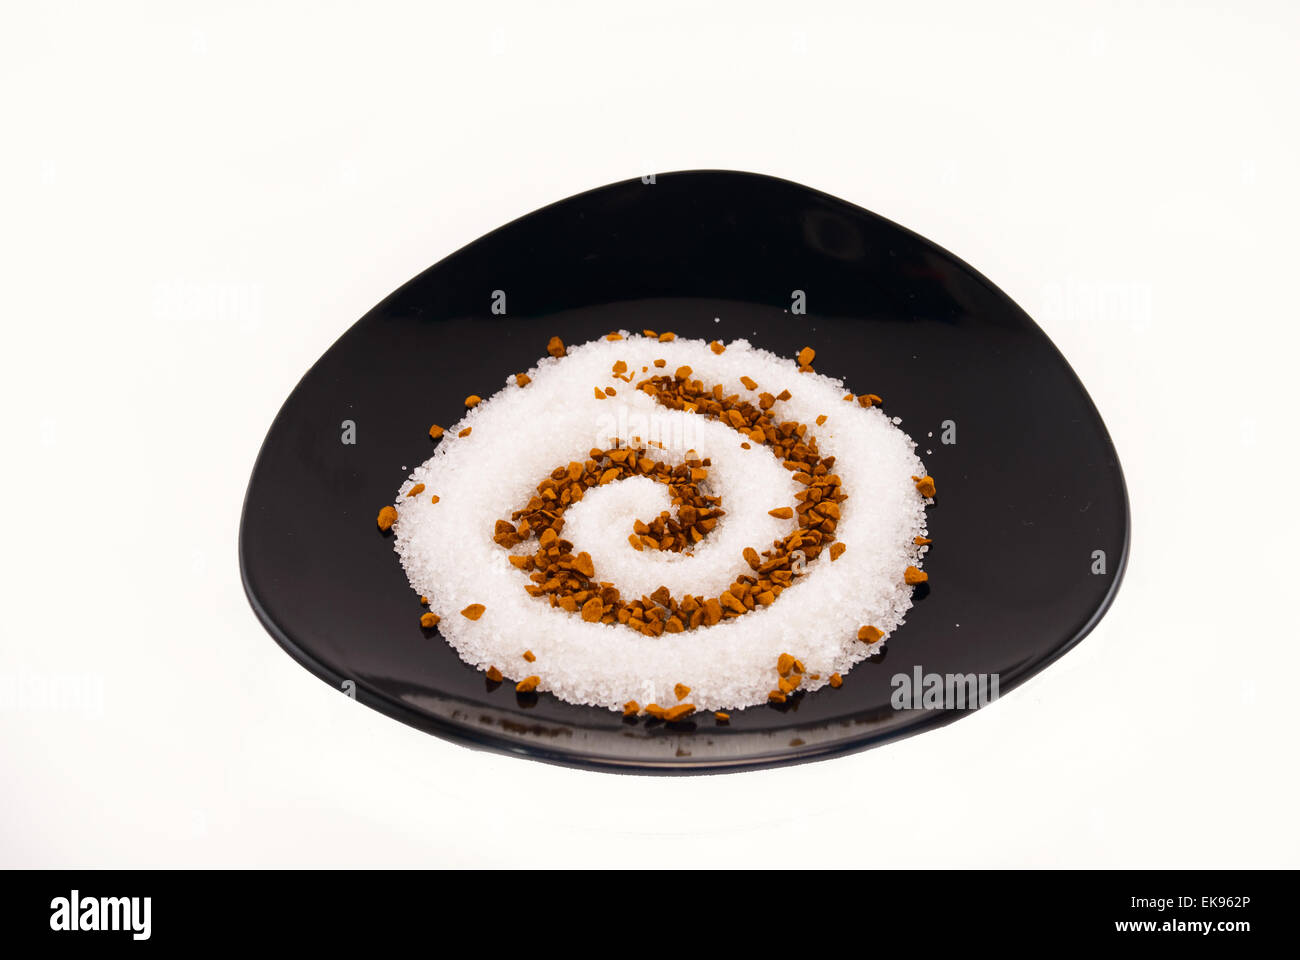 powdered sugar on a black saucer isolated on white Stock Photo